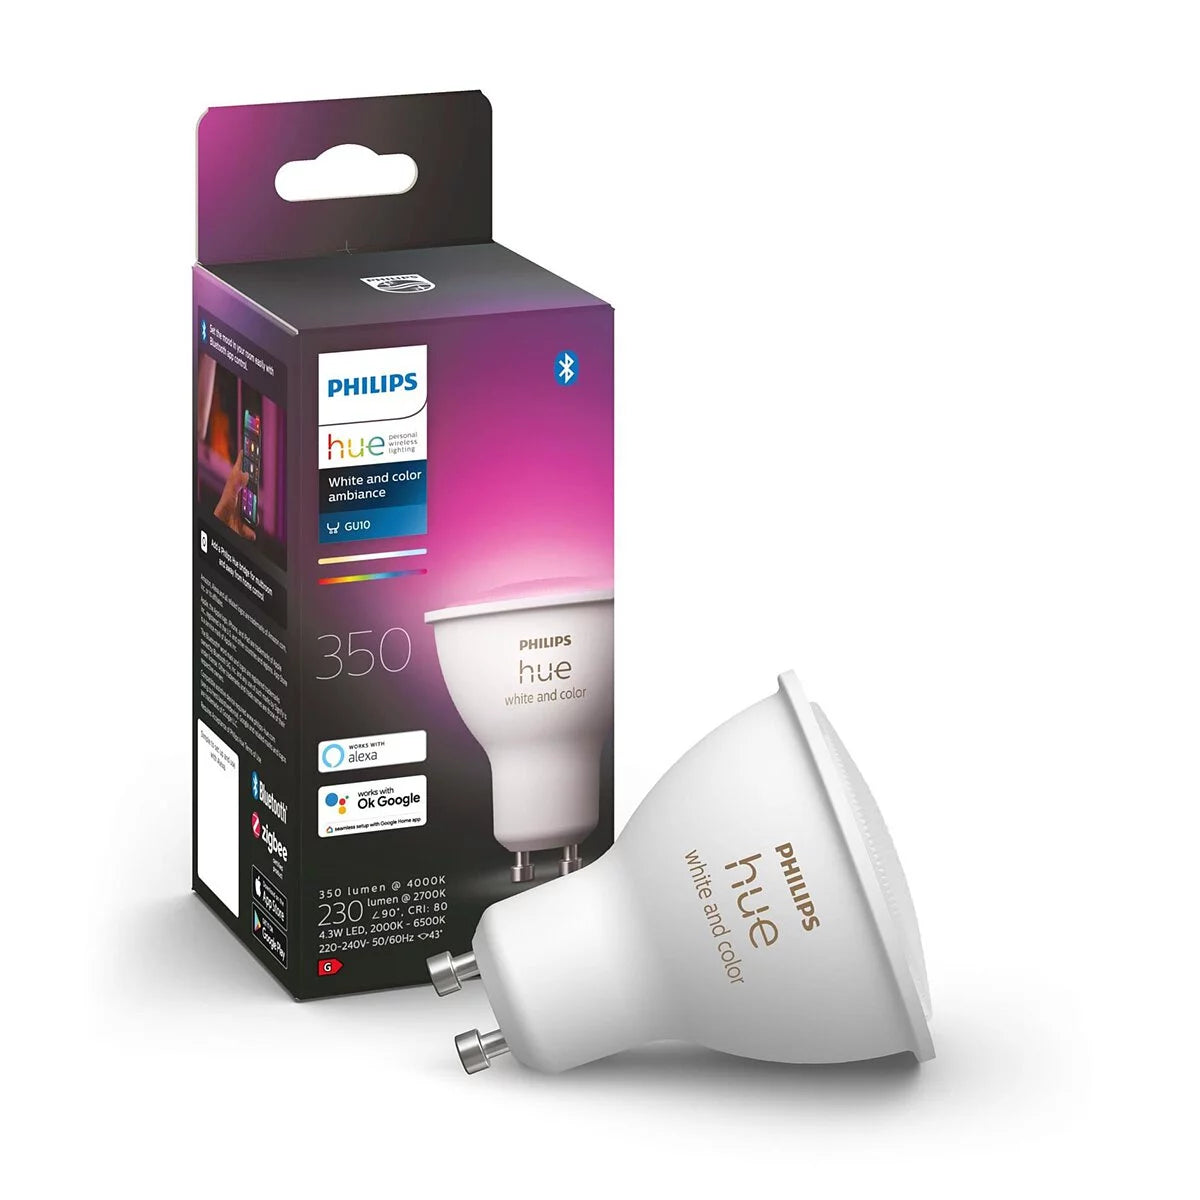 Philips Hue GU10 Bulb with Bluetooth (White and Color Ambiance)